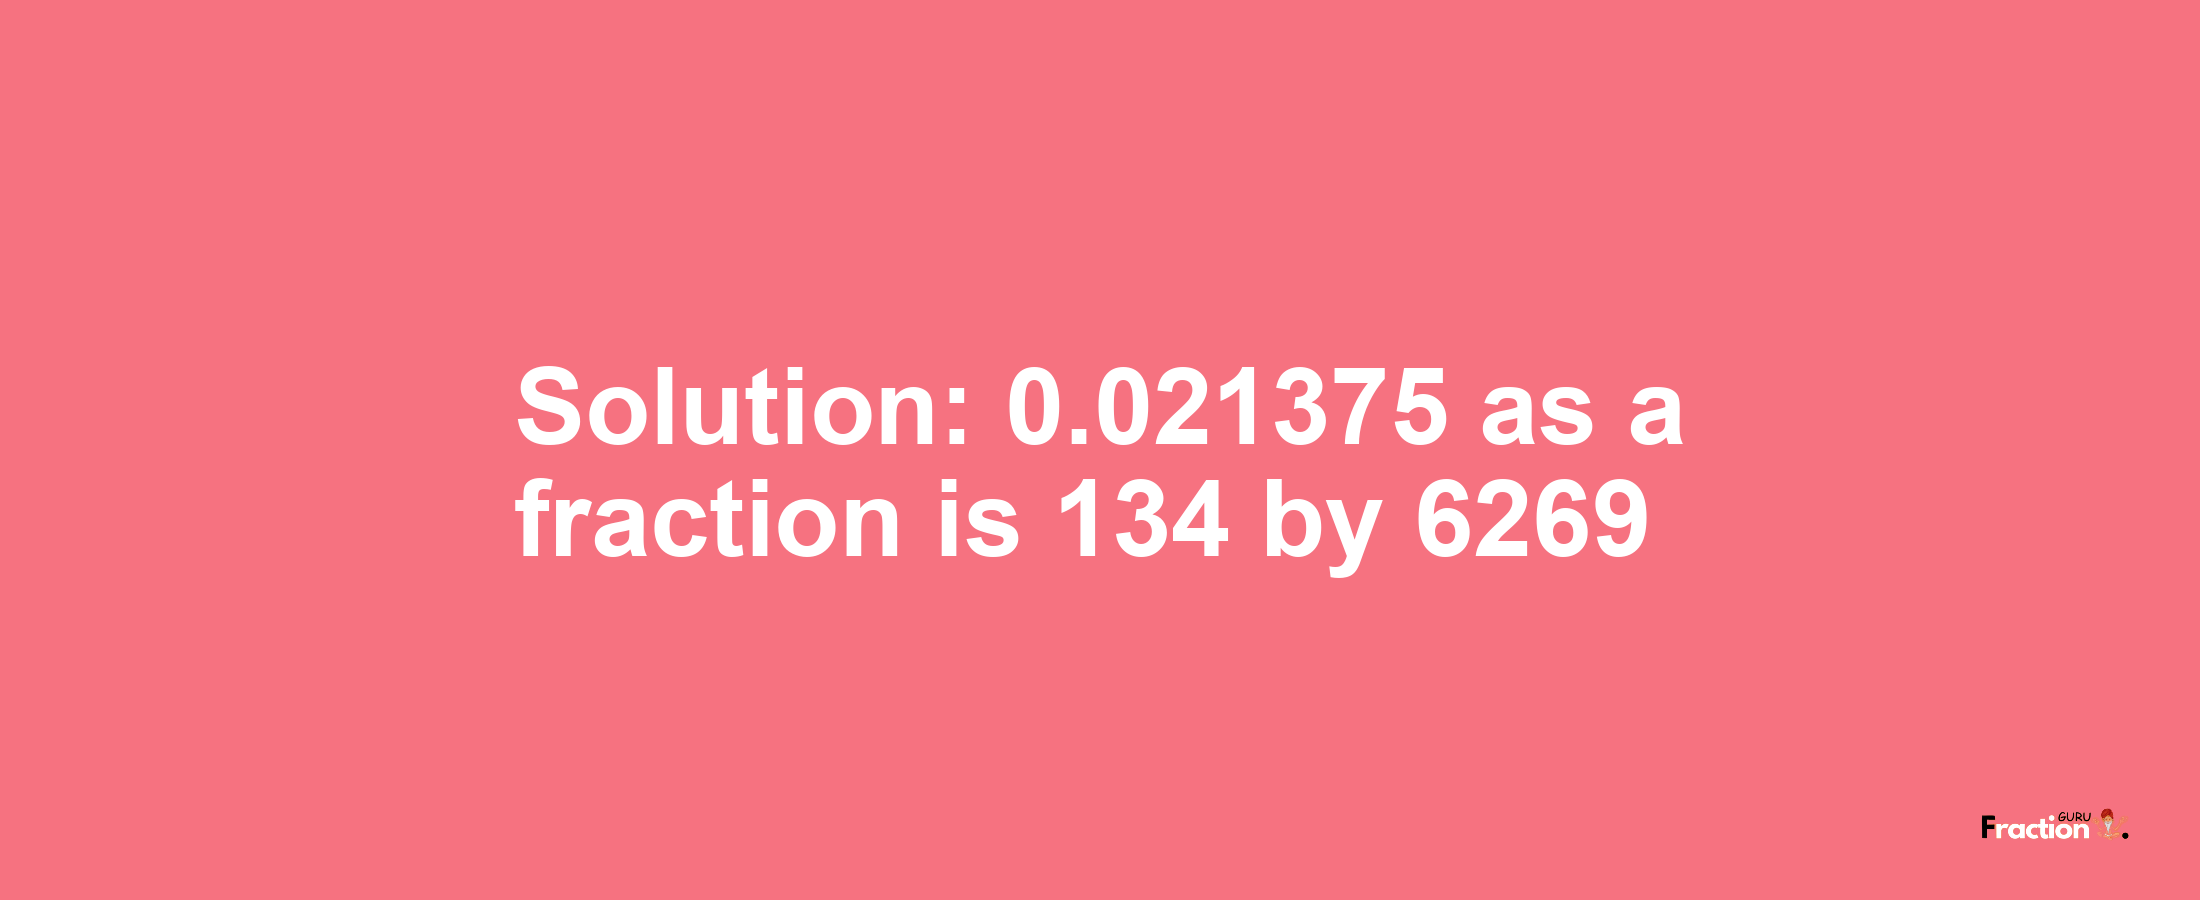 Solution:0.021375 as a fraction is 134/6269